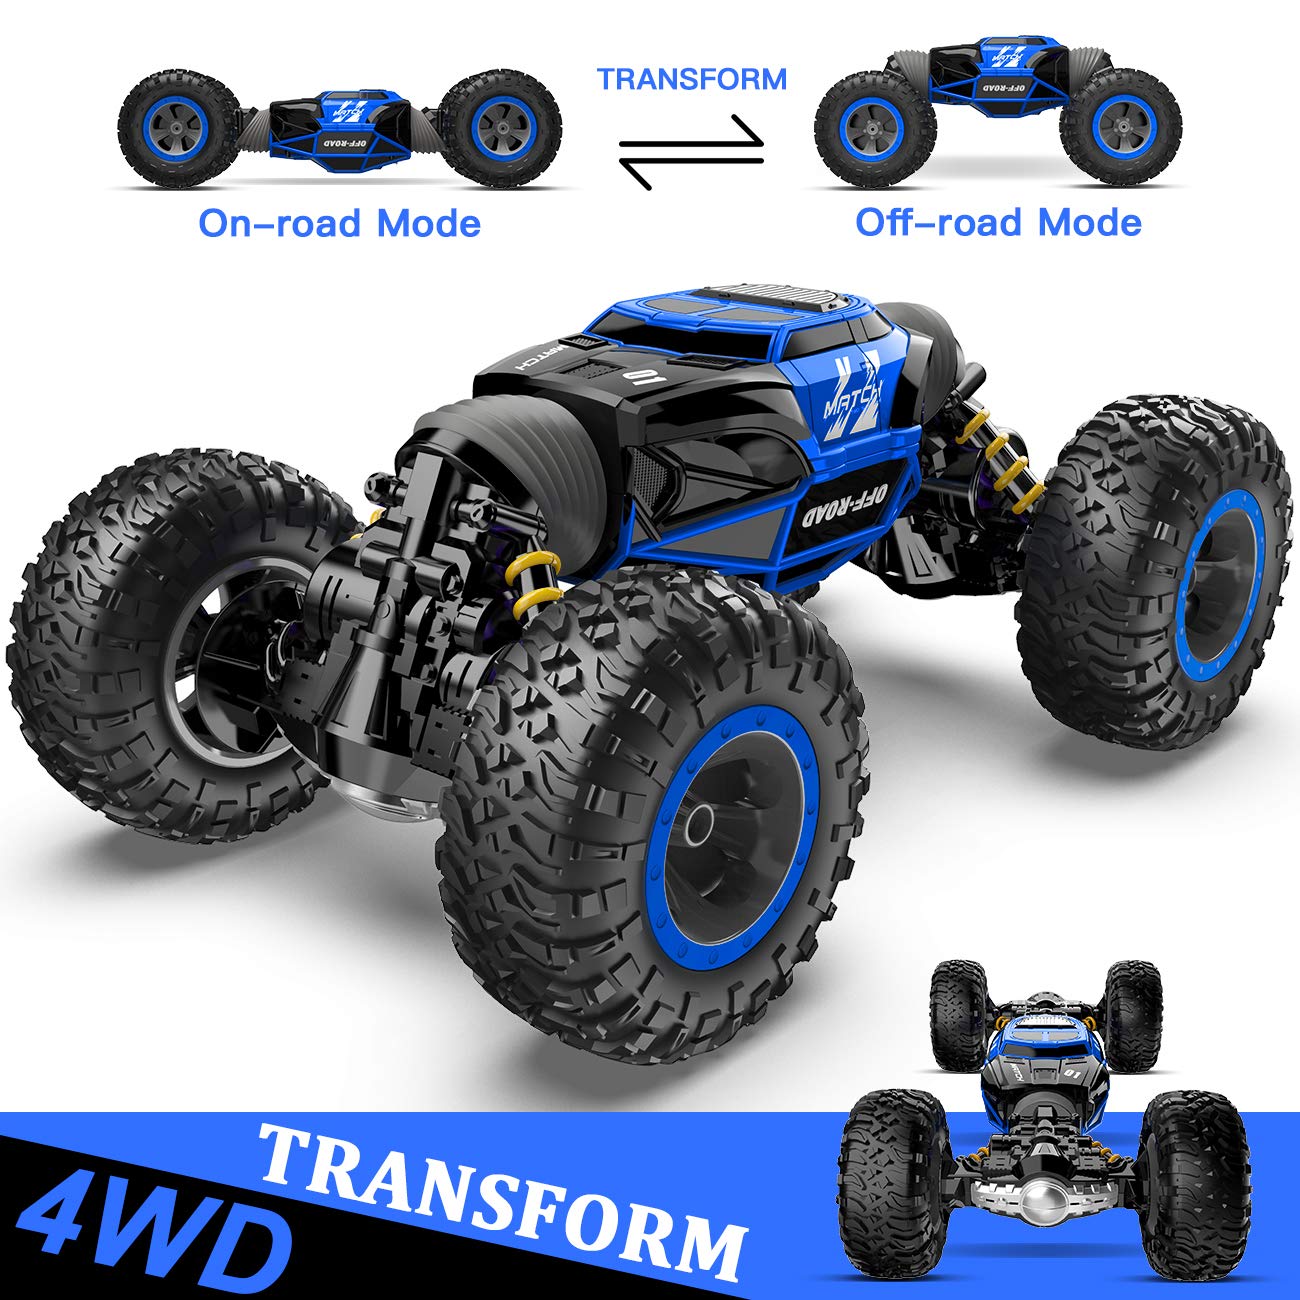 BEZgAR TD141 Rc cars-1:14 Scale Remote control crawler, 4WD Transform 15 Kmh All Terrains Electric Toy Stunt cars Rc car Vehicle